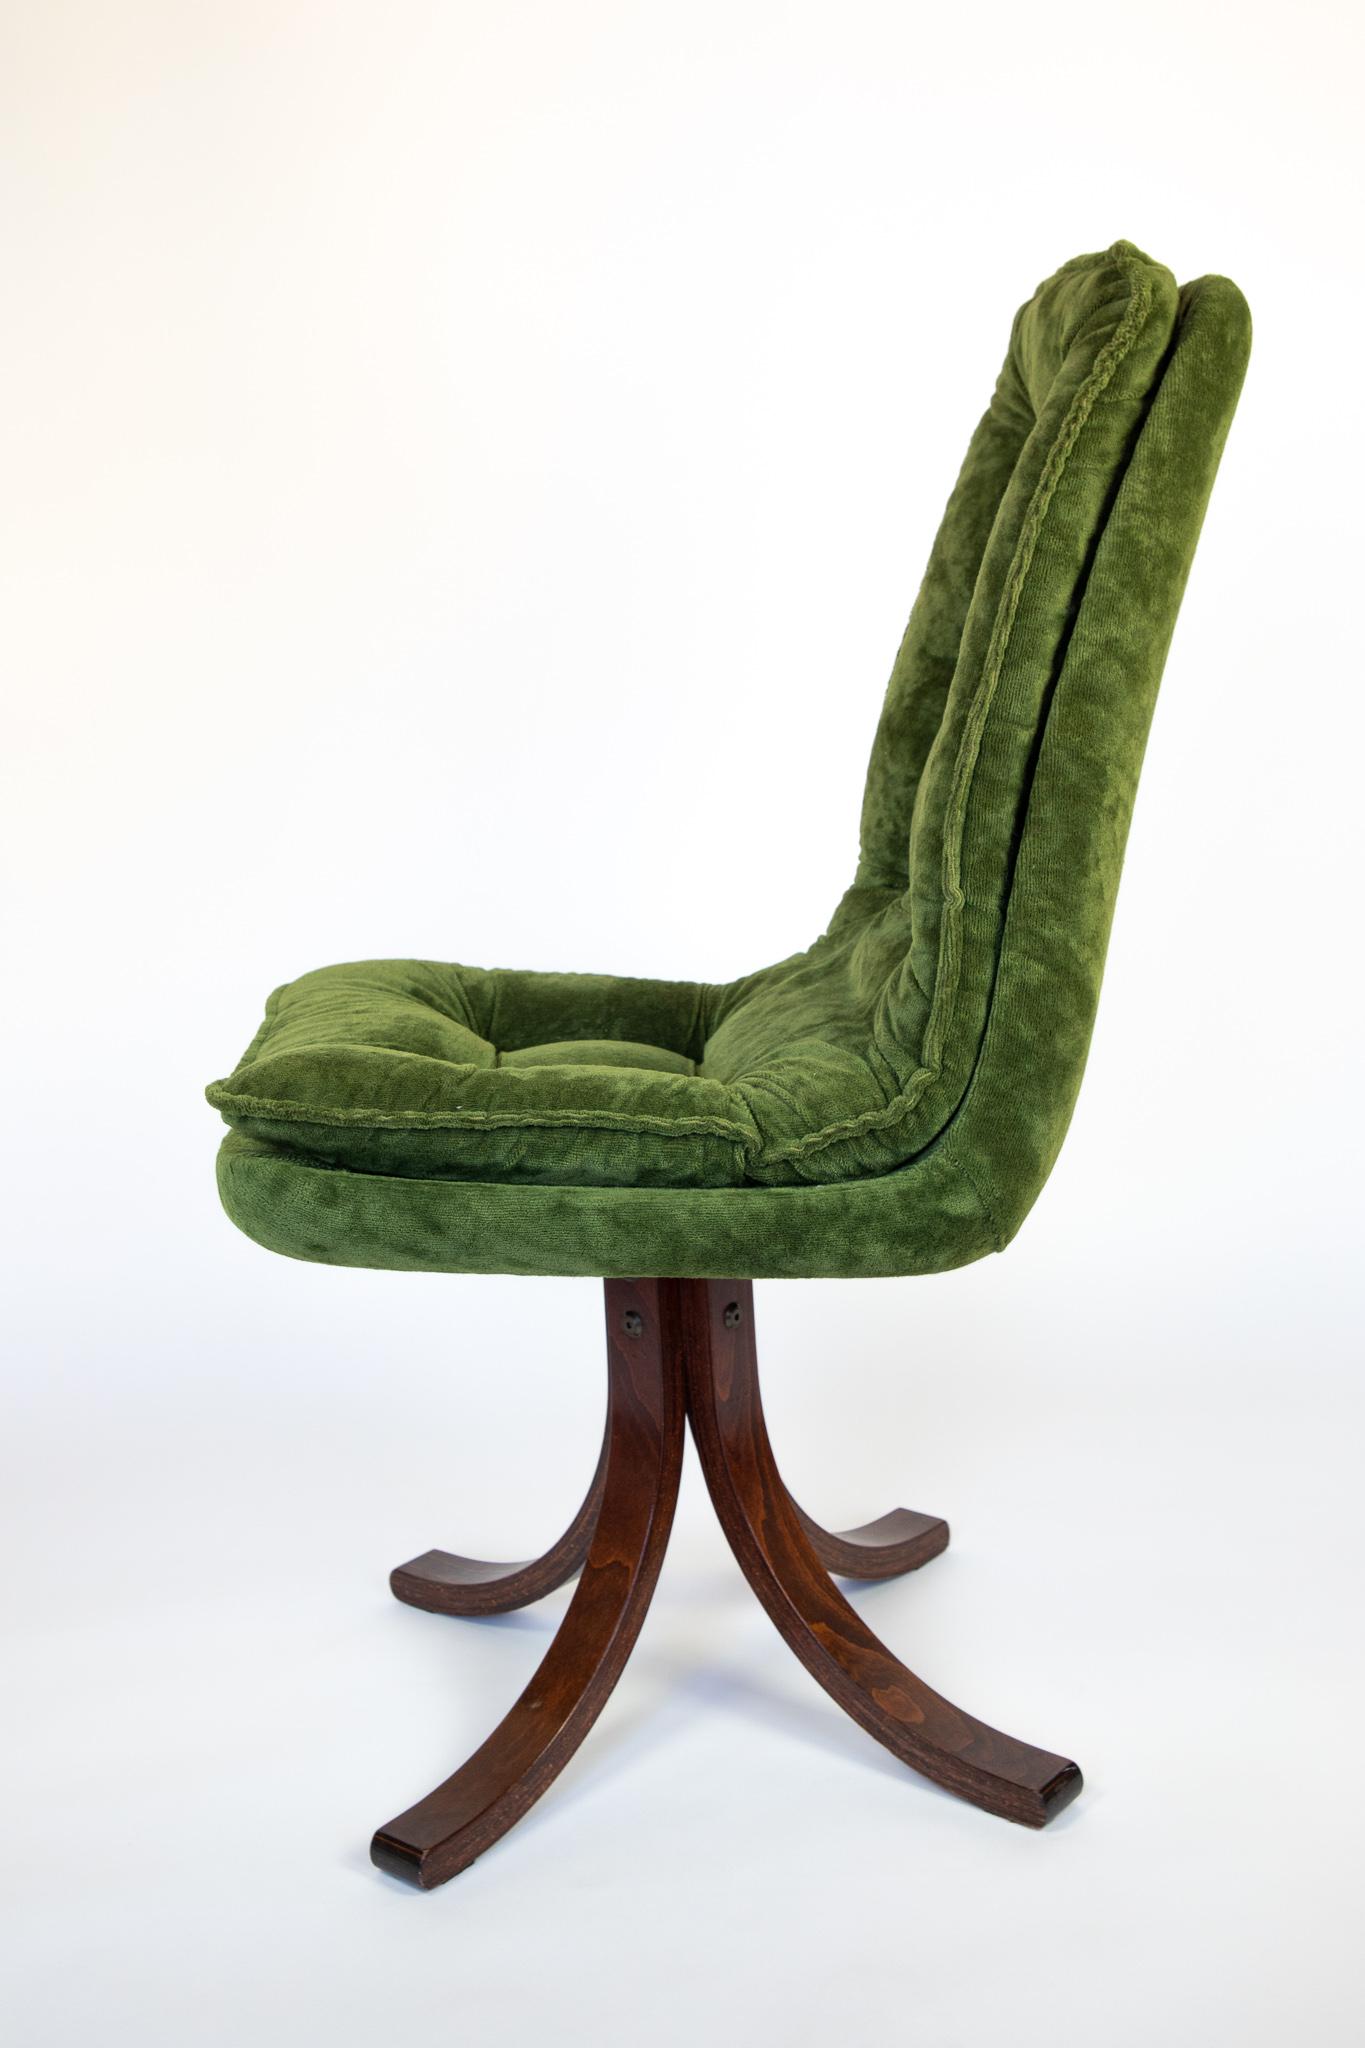 Mid-Century Modern Mid Century Modern Dining Chairs in Green Velvet Upholstery, Italy, 1970s For Sale